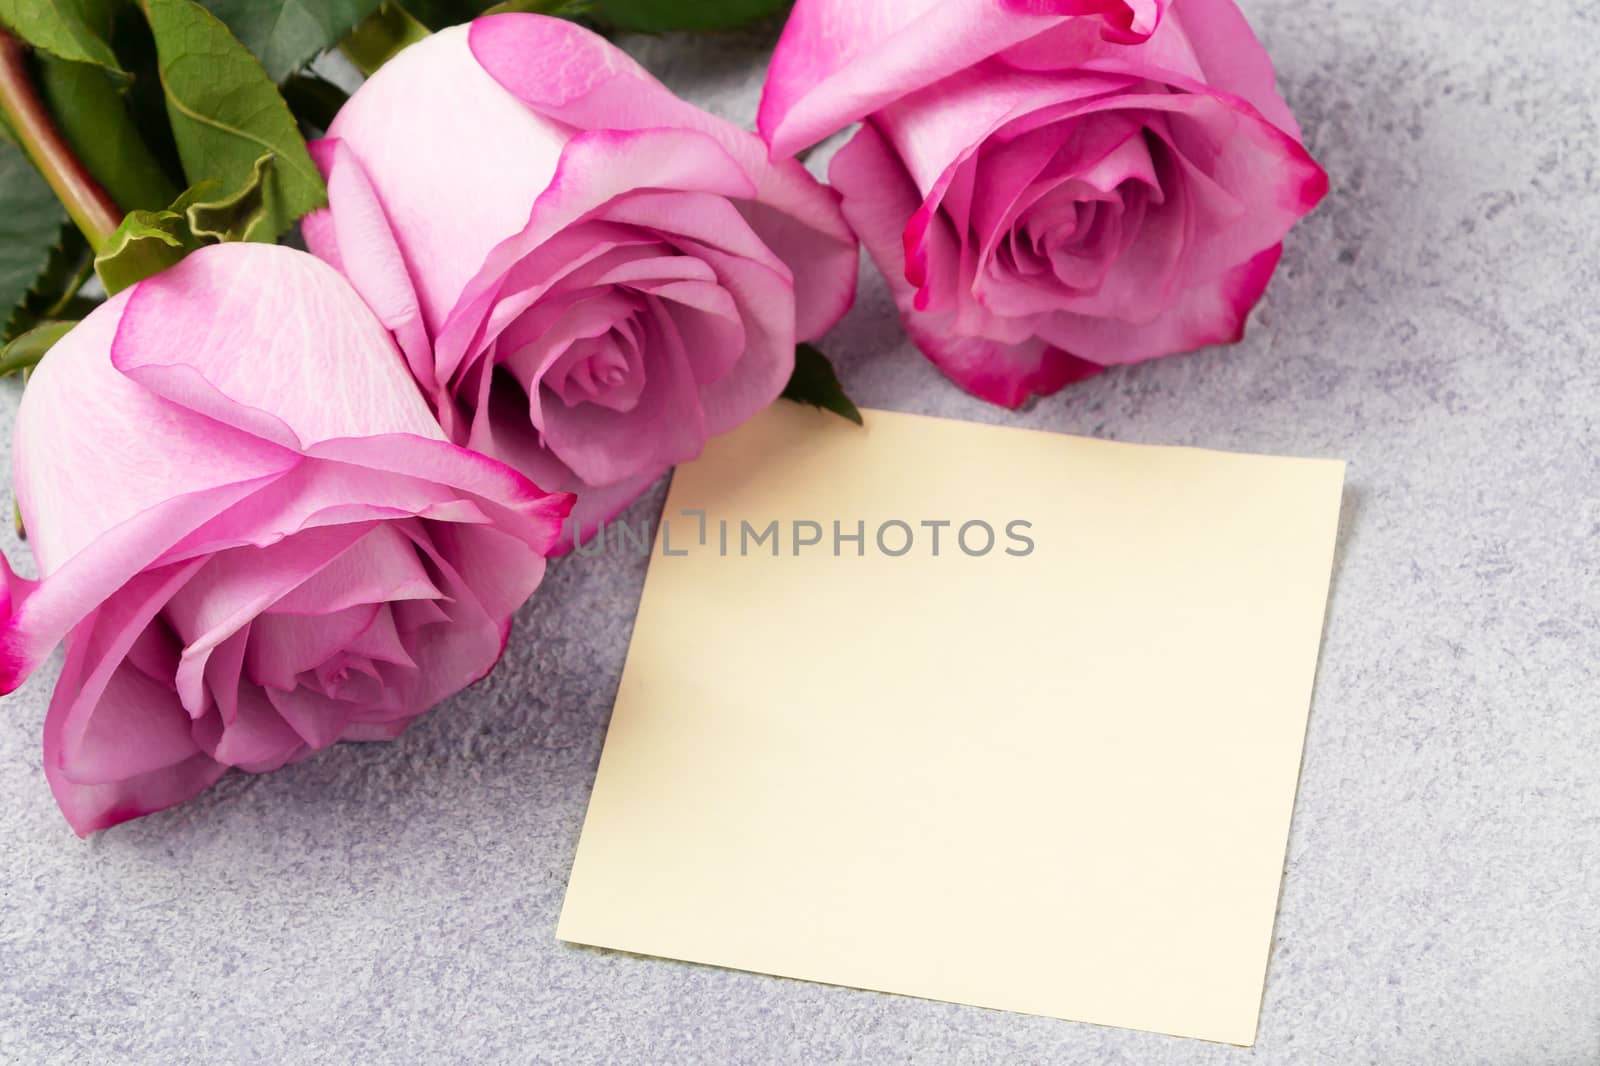 bouquet of pink roses and a blank note on the table.